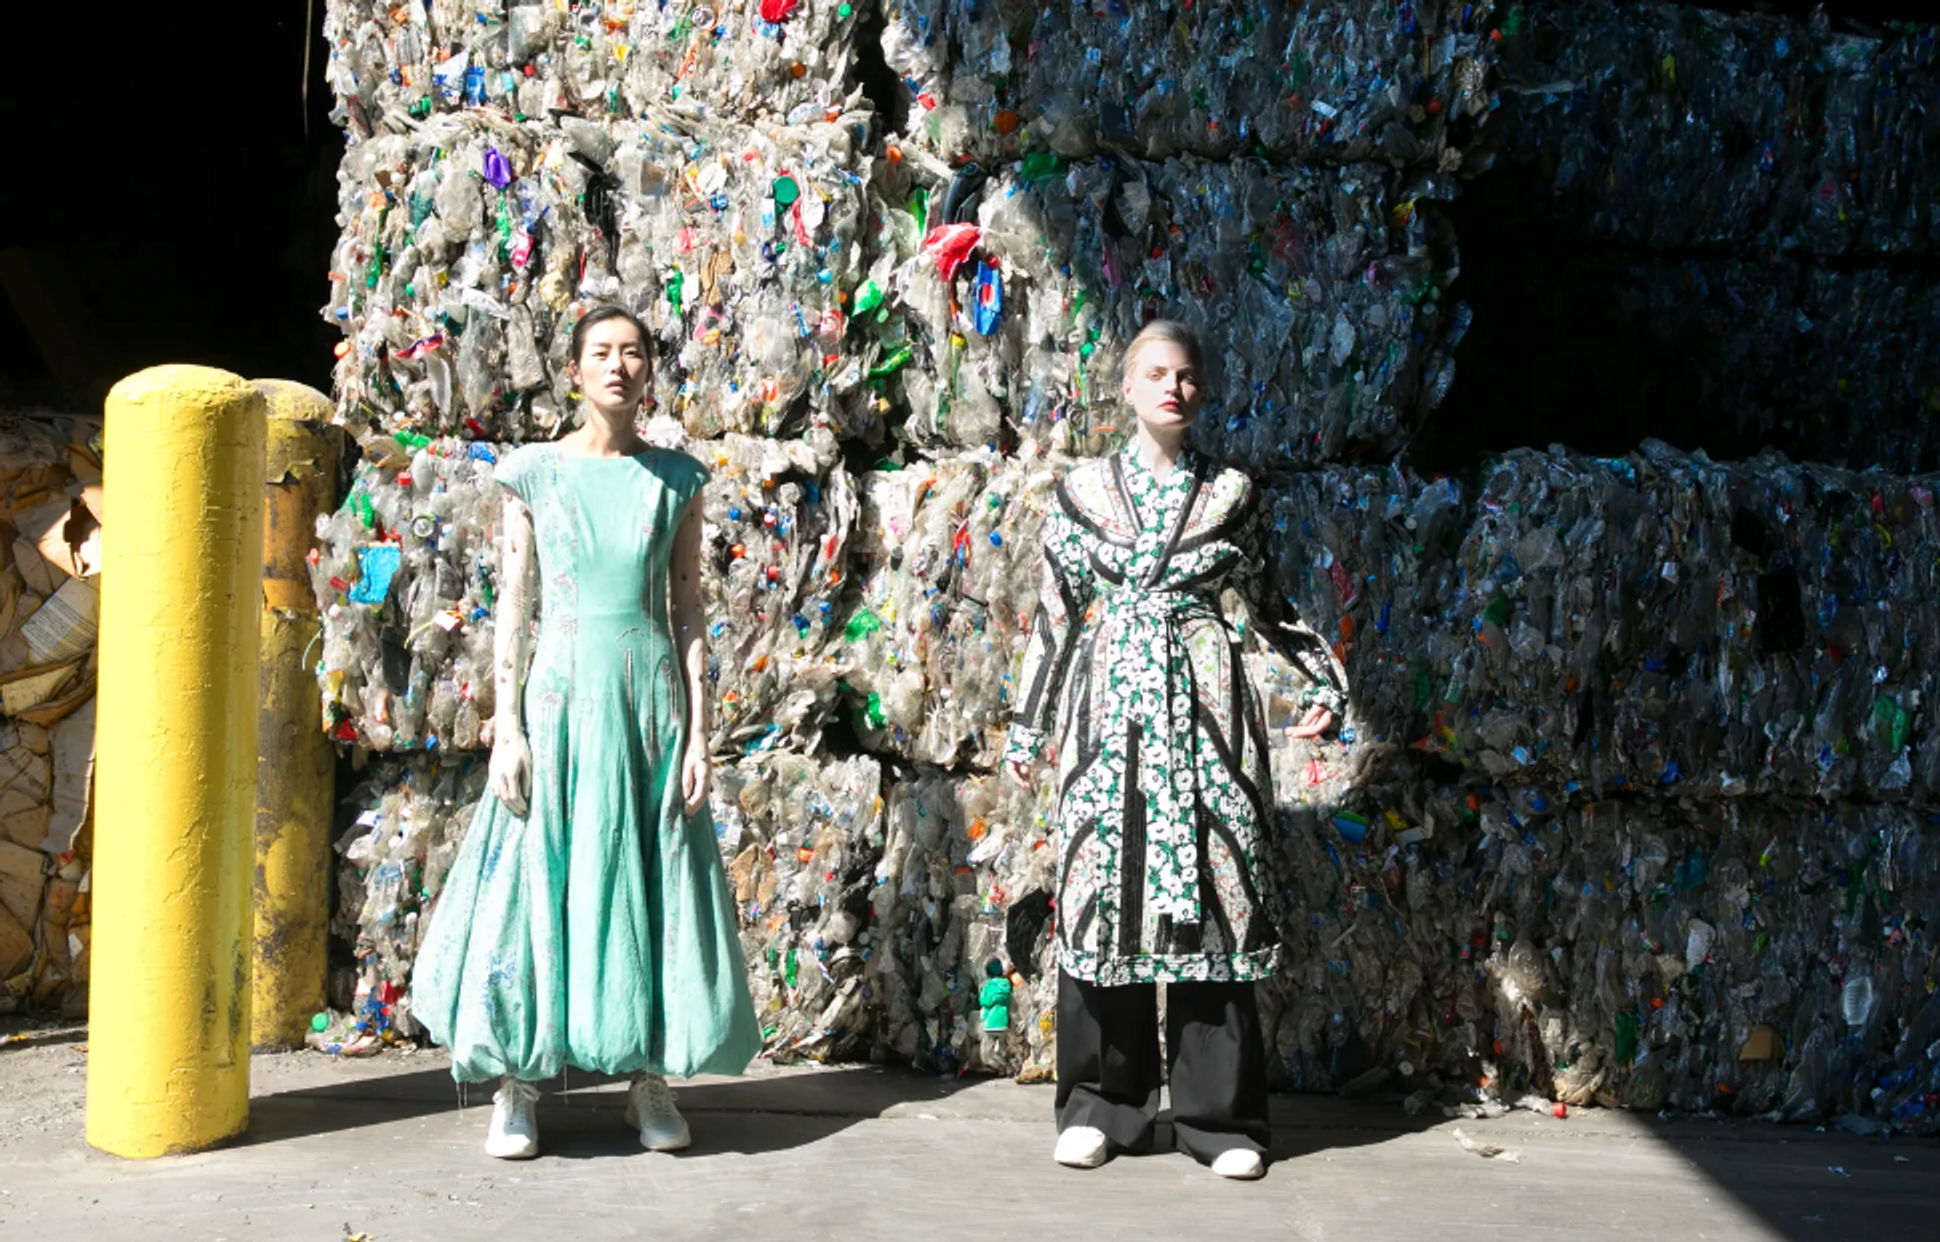 circular fashion – reuse of discarded and recycled materials.